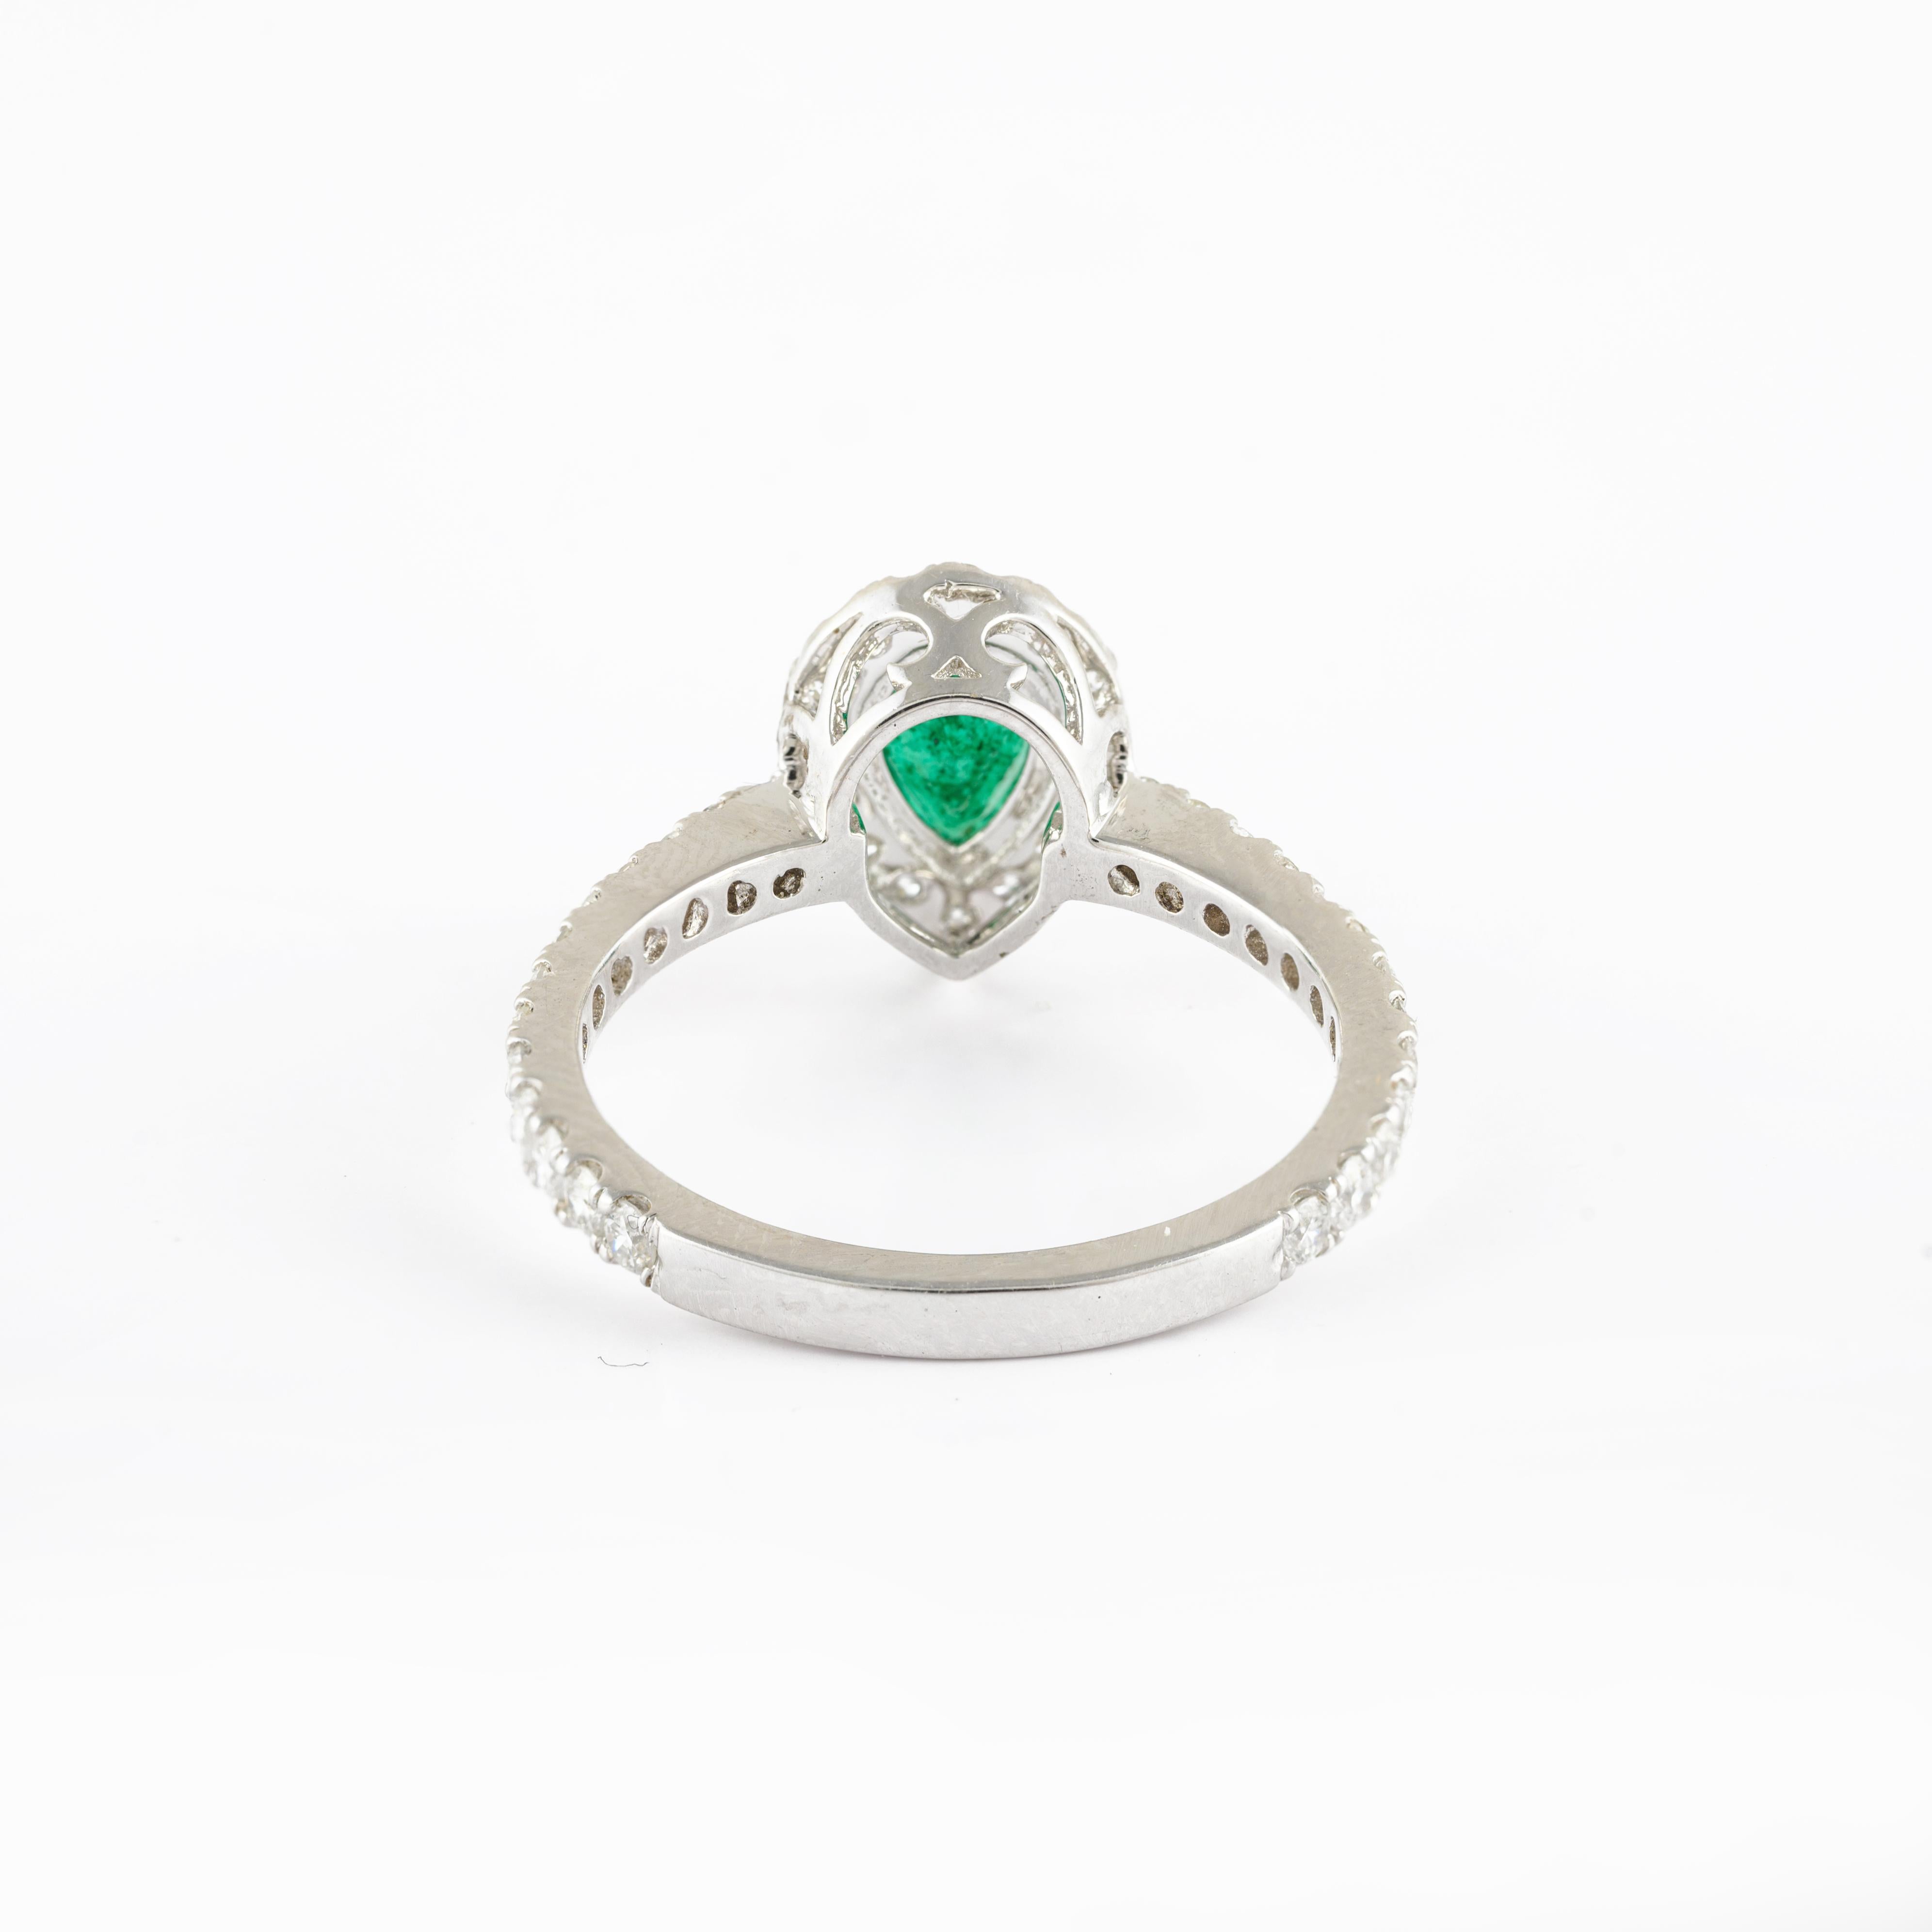 For Sale:  Exclusive 18k Solid White Gold Halo Diamond Natural Pear Cut Emerald Ring 4